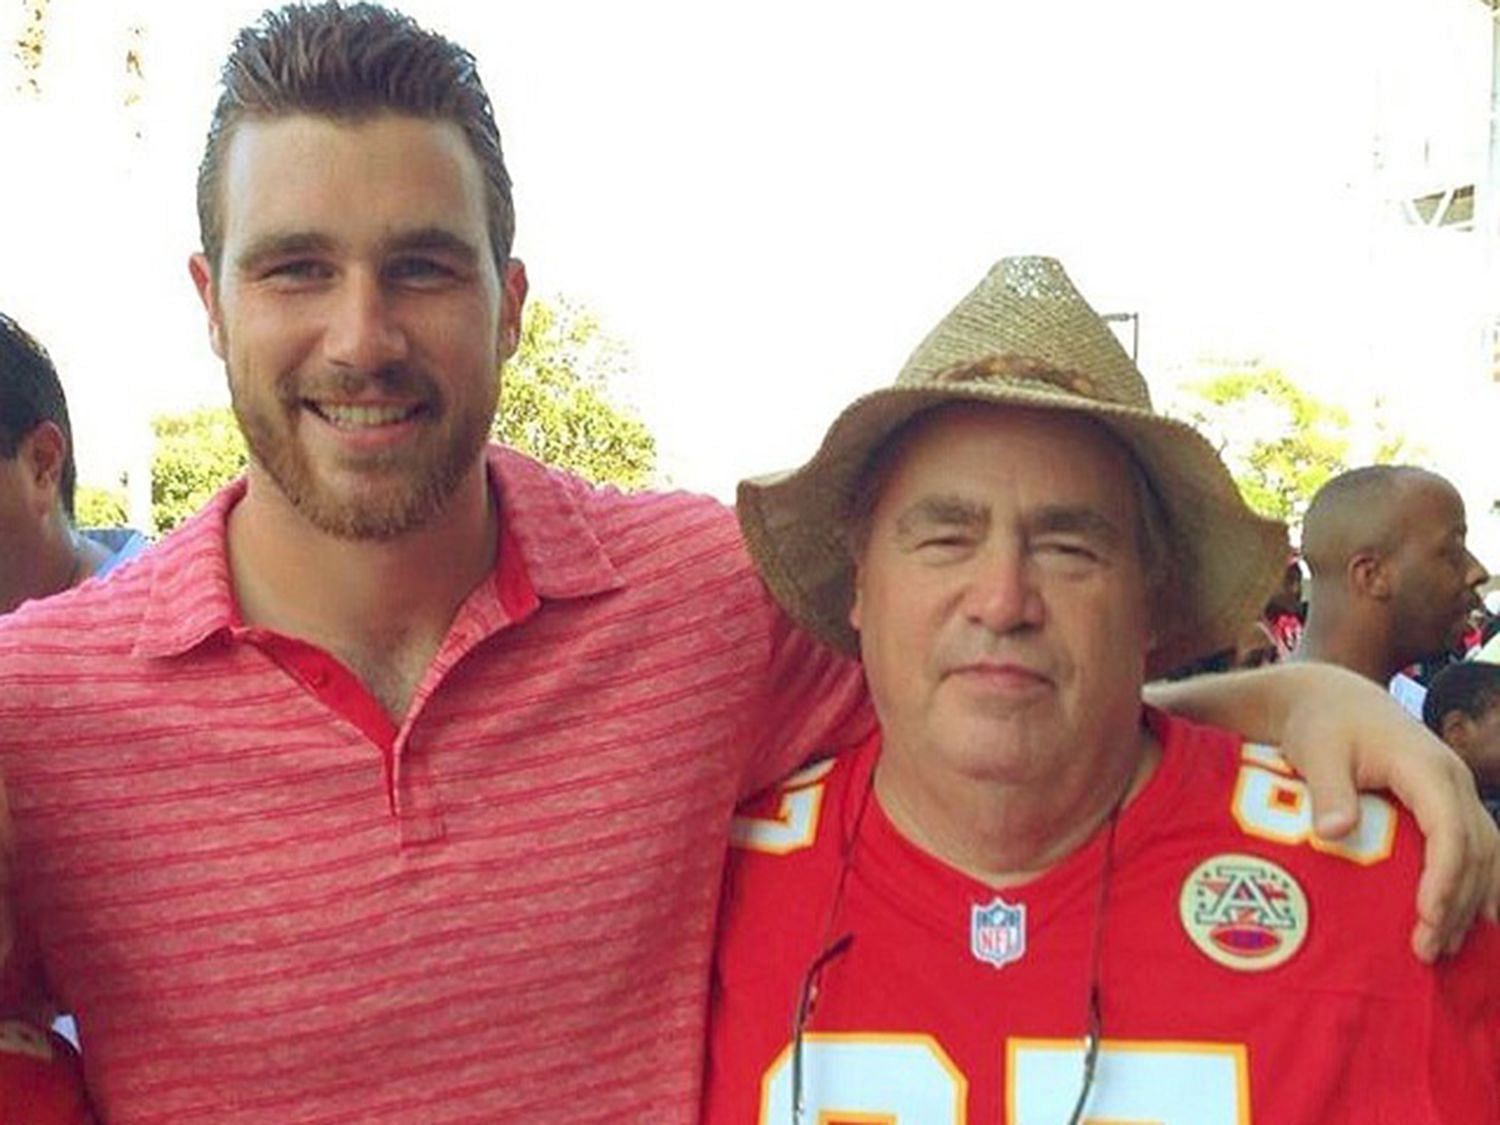 Travis Kelce (L) with his father Ed Kelce